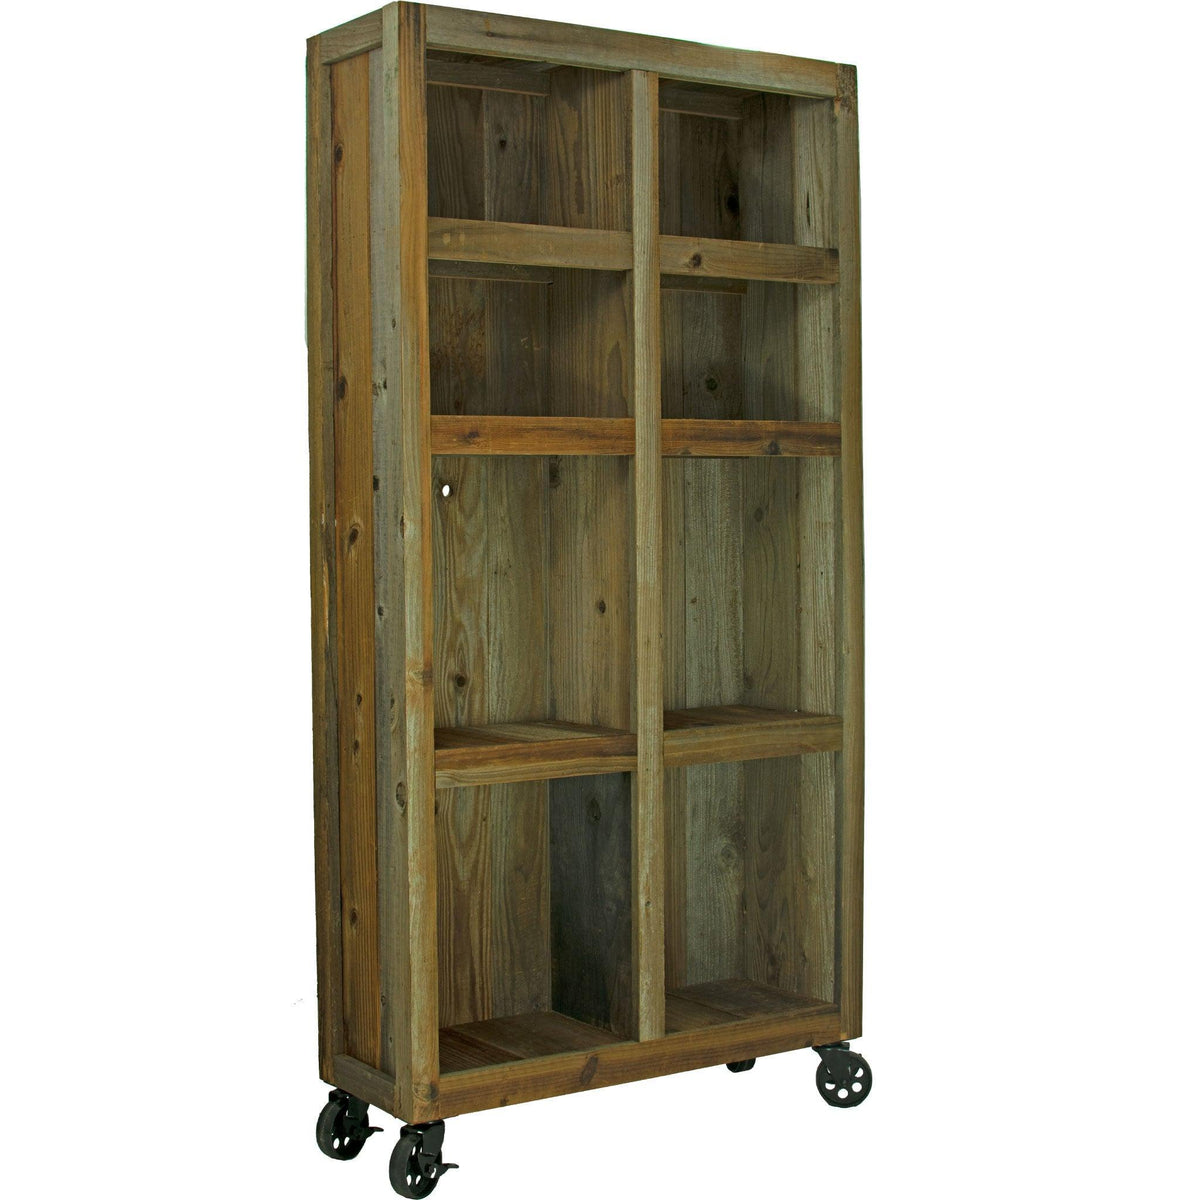 Introducing Lee Display's brand new Outdoor Rolling Redwood Storage Cabinet with Wheels.  Shelving Unit with 5in Black Casters on sale at leedisplay.com